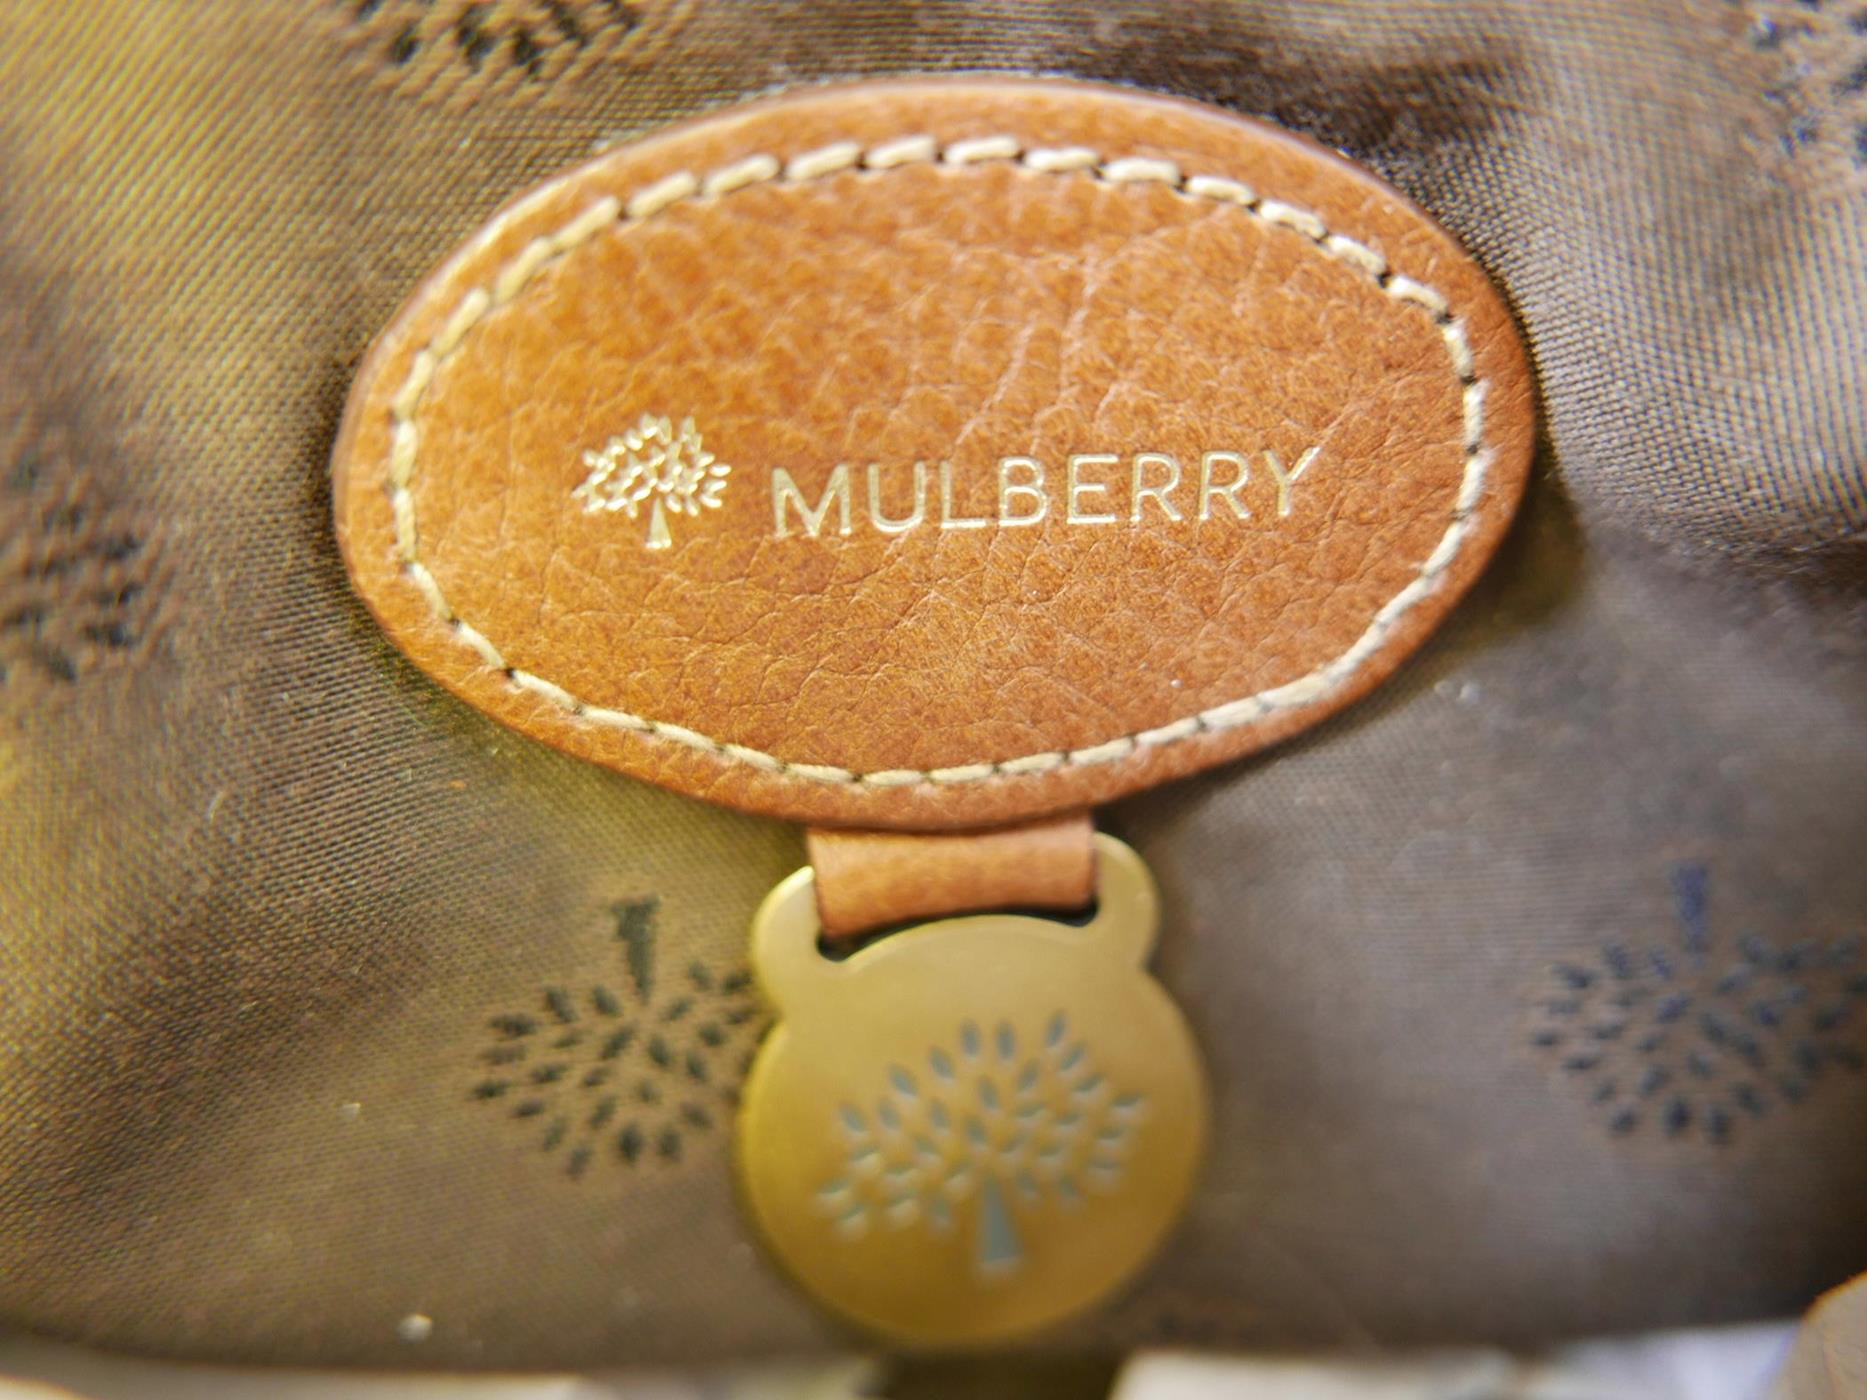 A Mulberry 'Joelle' oak coloured leather shoulder bag, with original purchase receipt - Image 7 of 7